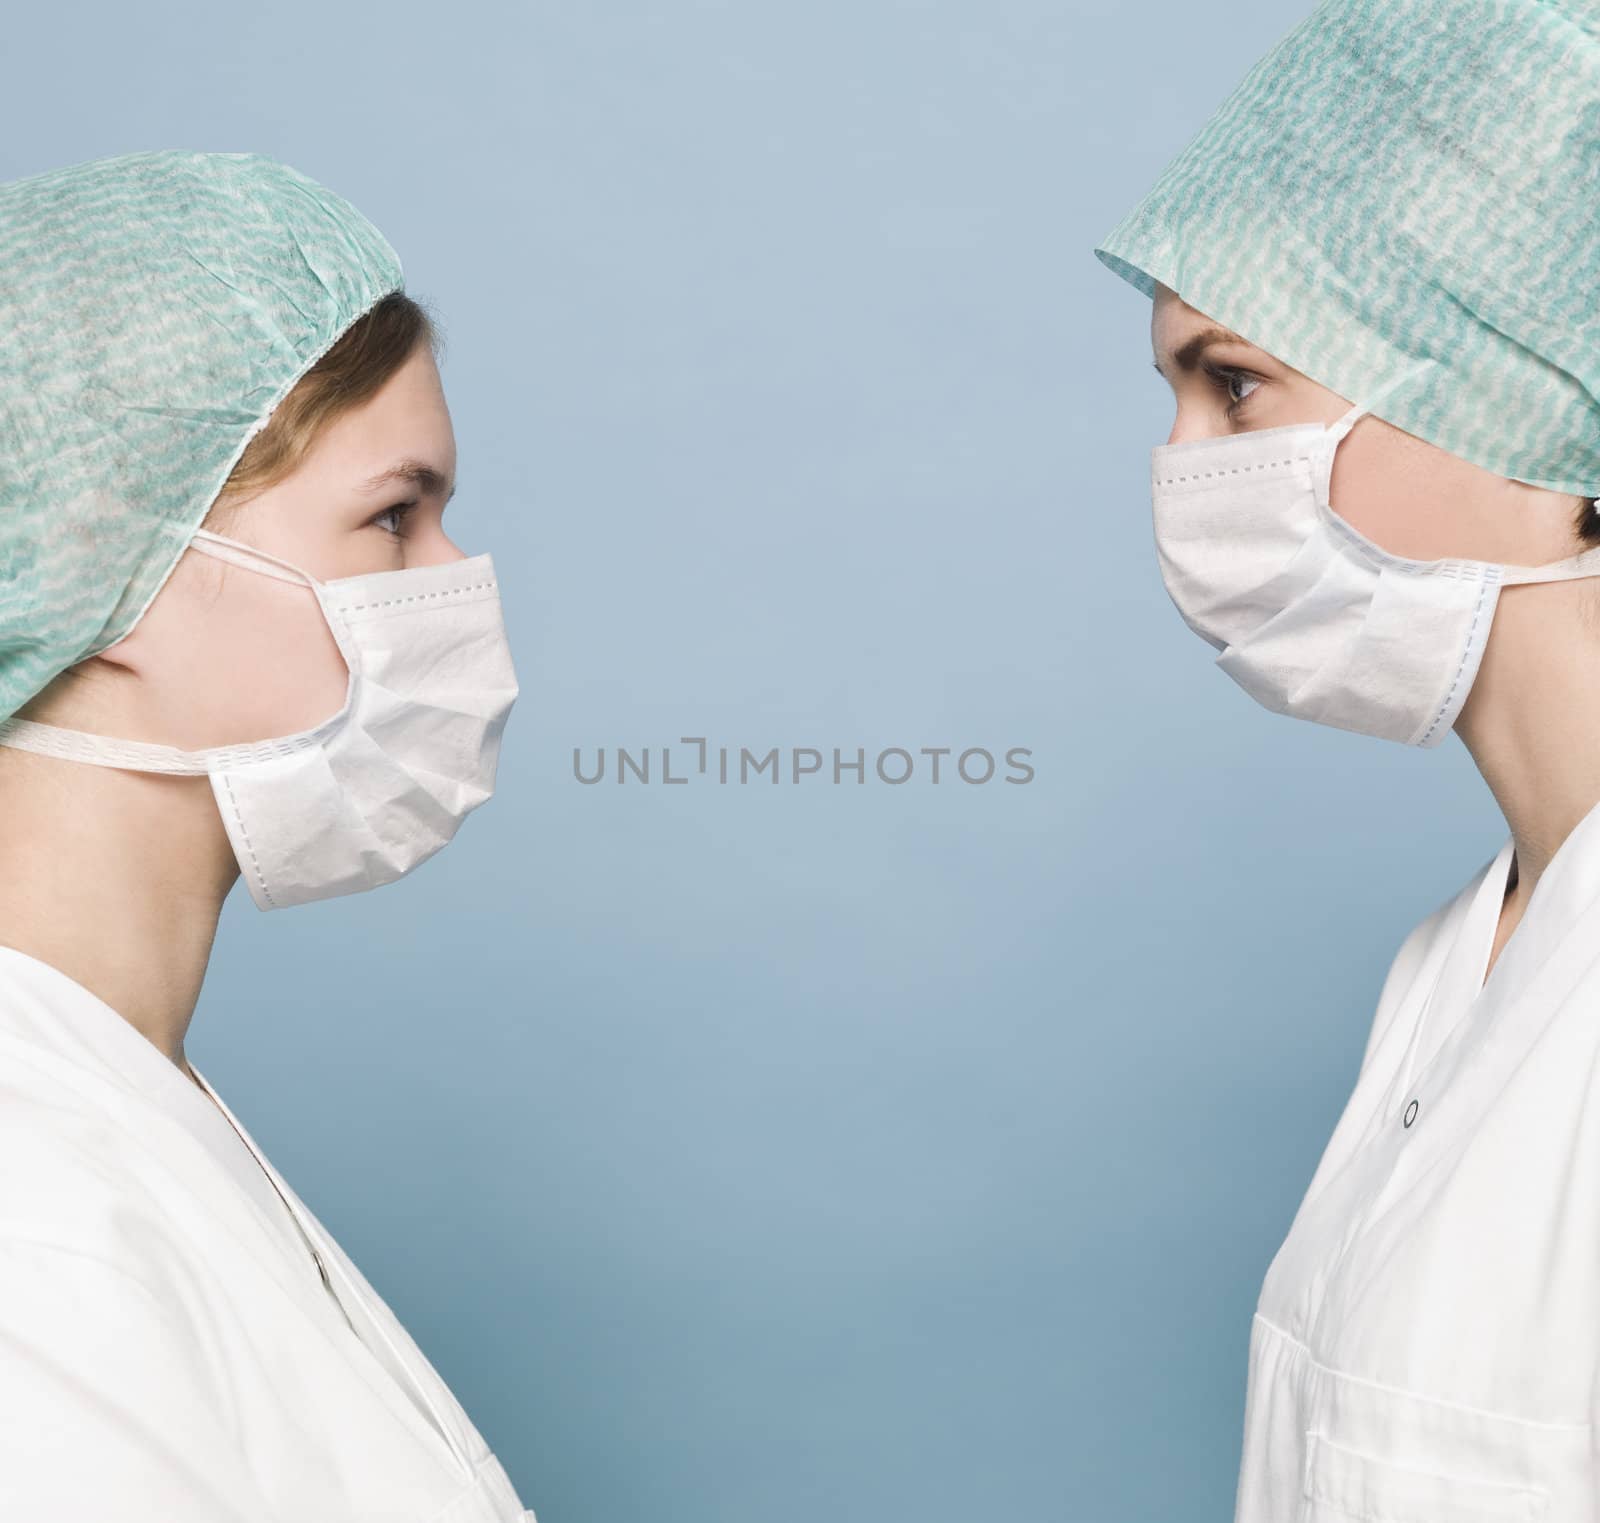 Two nurses with surgical masks by gemenacom